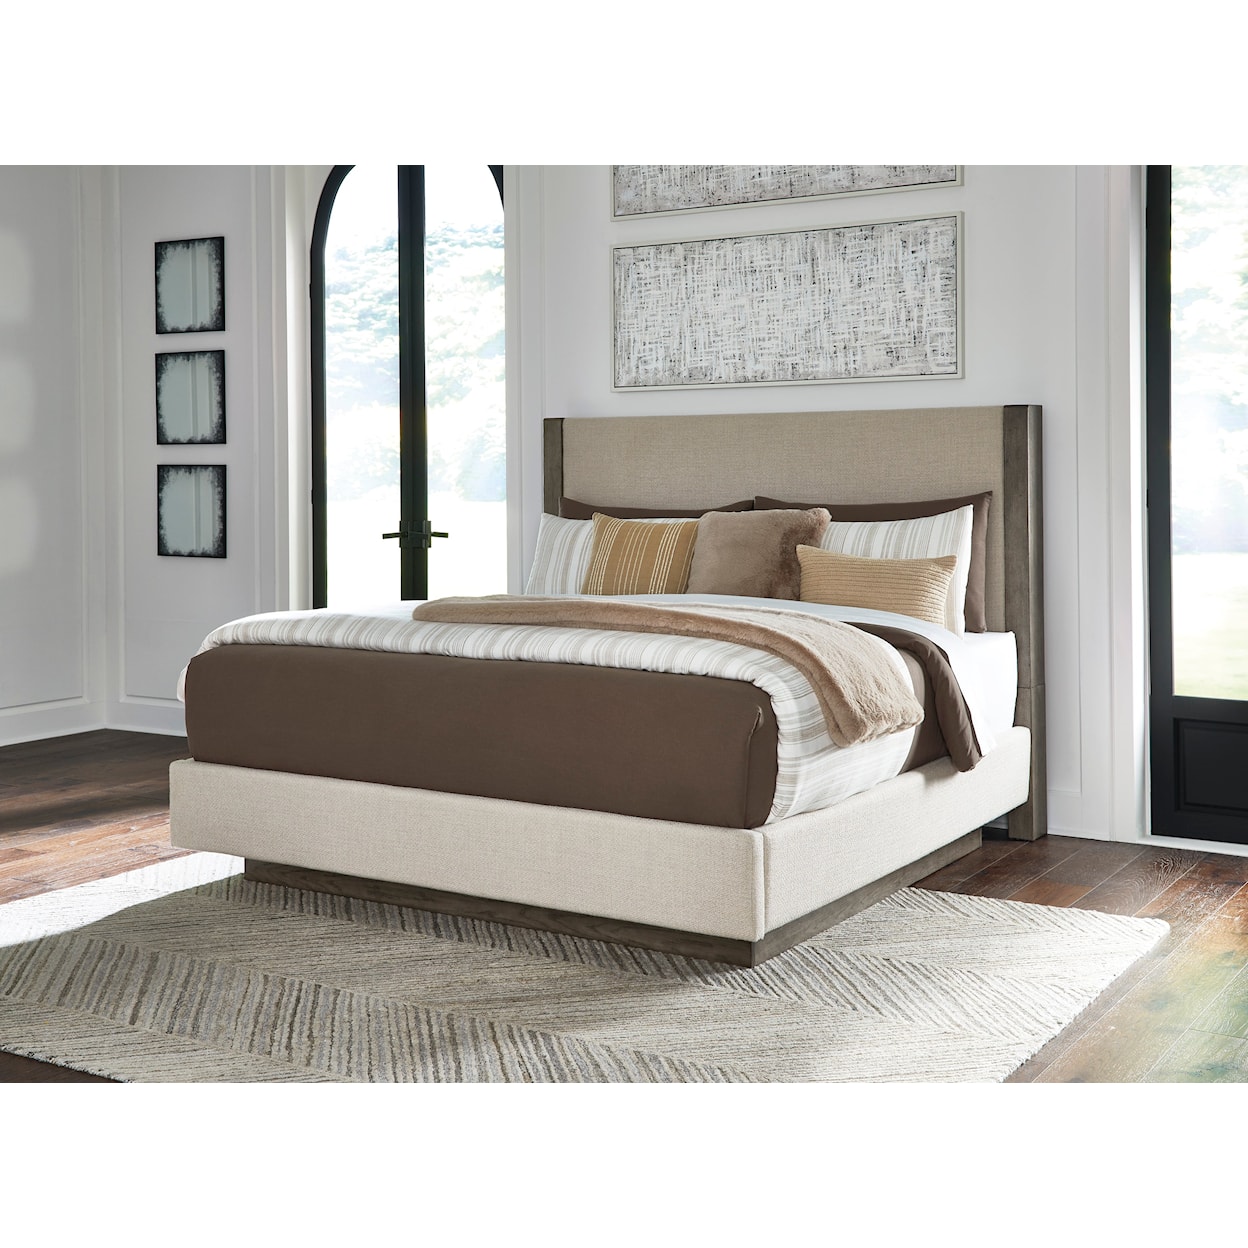 Benchcraft by Ashley Anibecca Queen Upholstered Bed